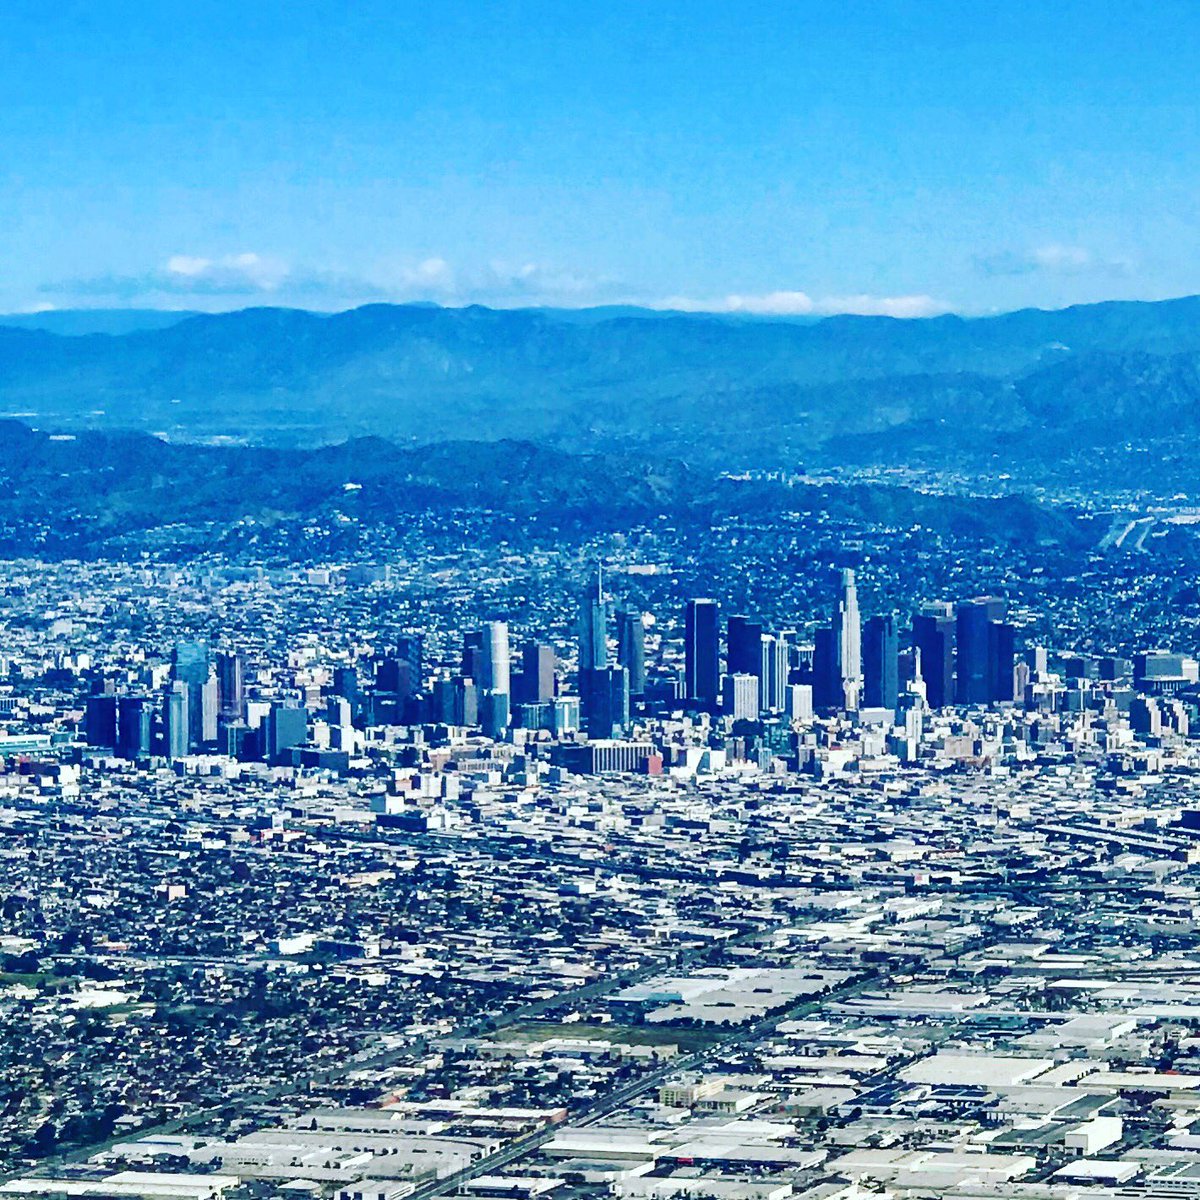 Landed... made it to the #CityofAngels 🙏 🙏 🙏 time to go to work!!!

#ArmorUp #ArmorUpAmerica #ArmorUpArmedForces #SafeCallNow #CatchingHell #FirstIn #BayleeAlmon #ArmorUpWV #ArmorUpHawaii #ArmorUpTX #ArmorUpCA #ArmorUpOK #ArmorUpFL #ArmorUpIL #ArmorUpMD #ArmorUpVA